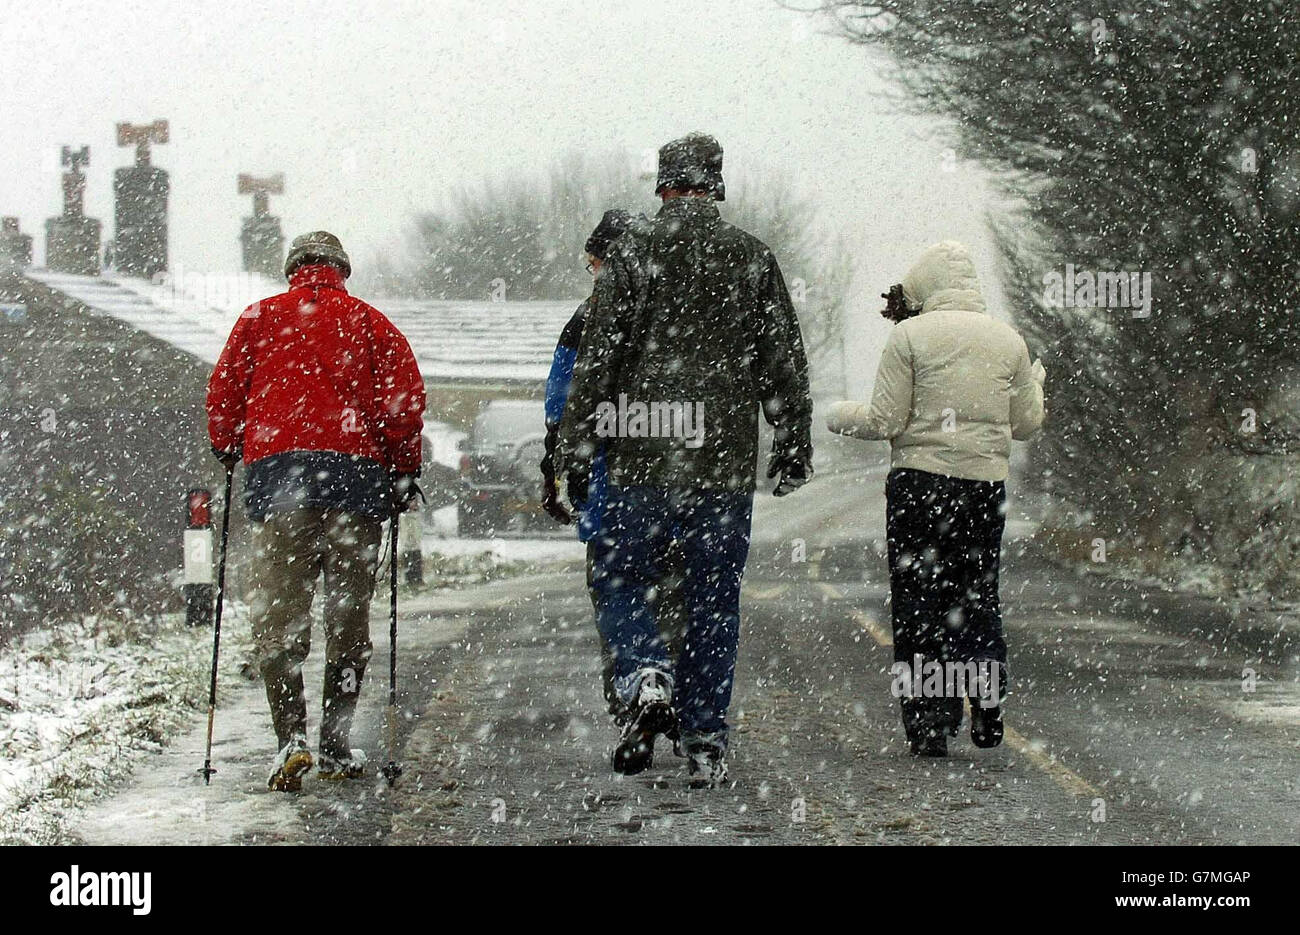 Christmas Day snowfalls give a seasonal look to the hills as walkers are undeterred by the weather. Stock Photo